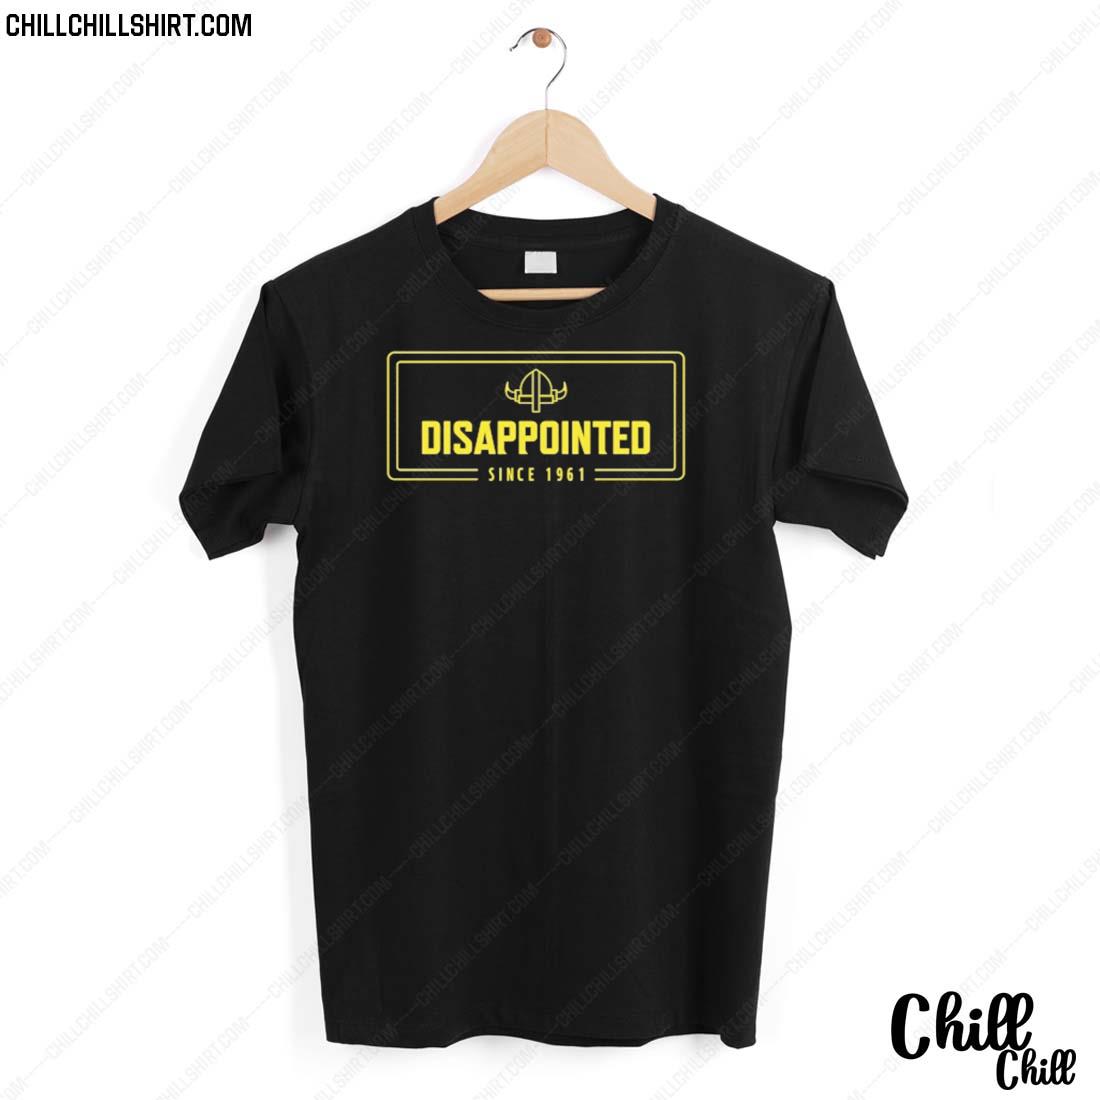 Official disappointed Since 1961 Shirt